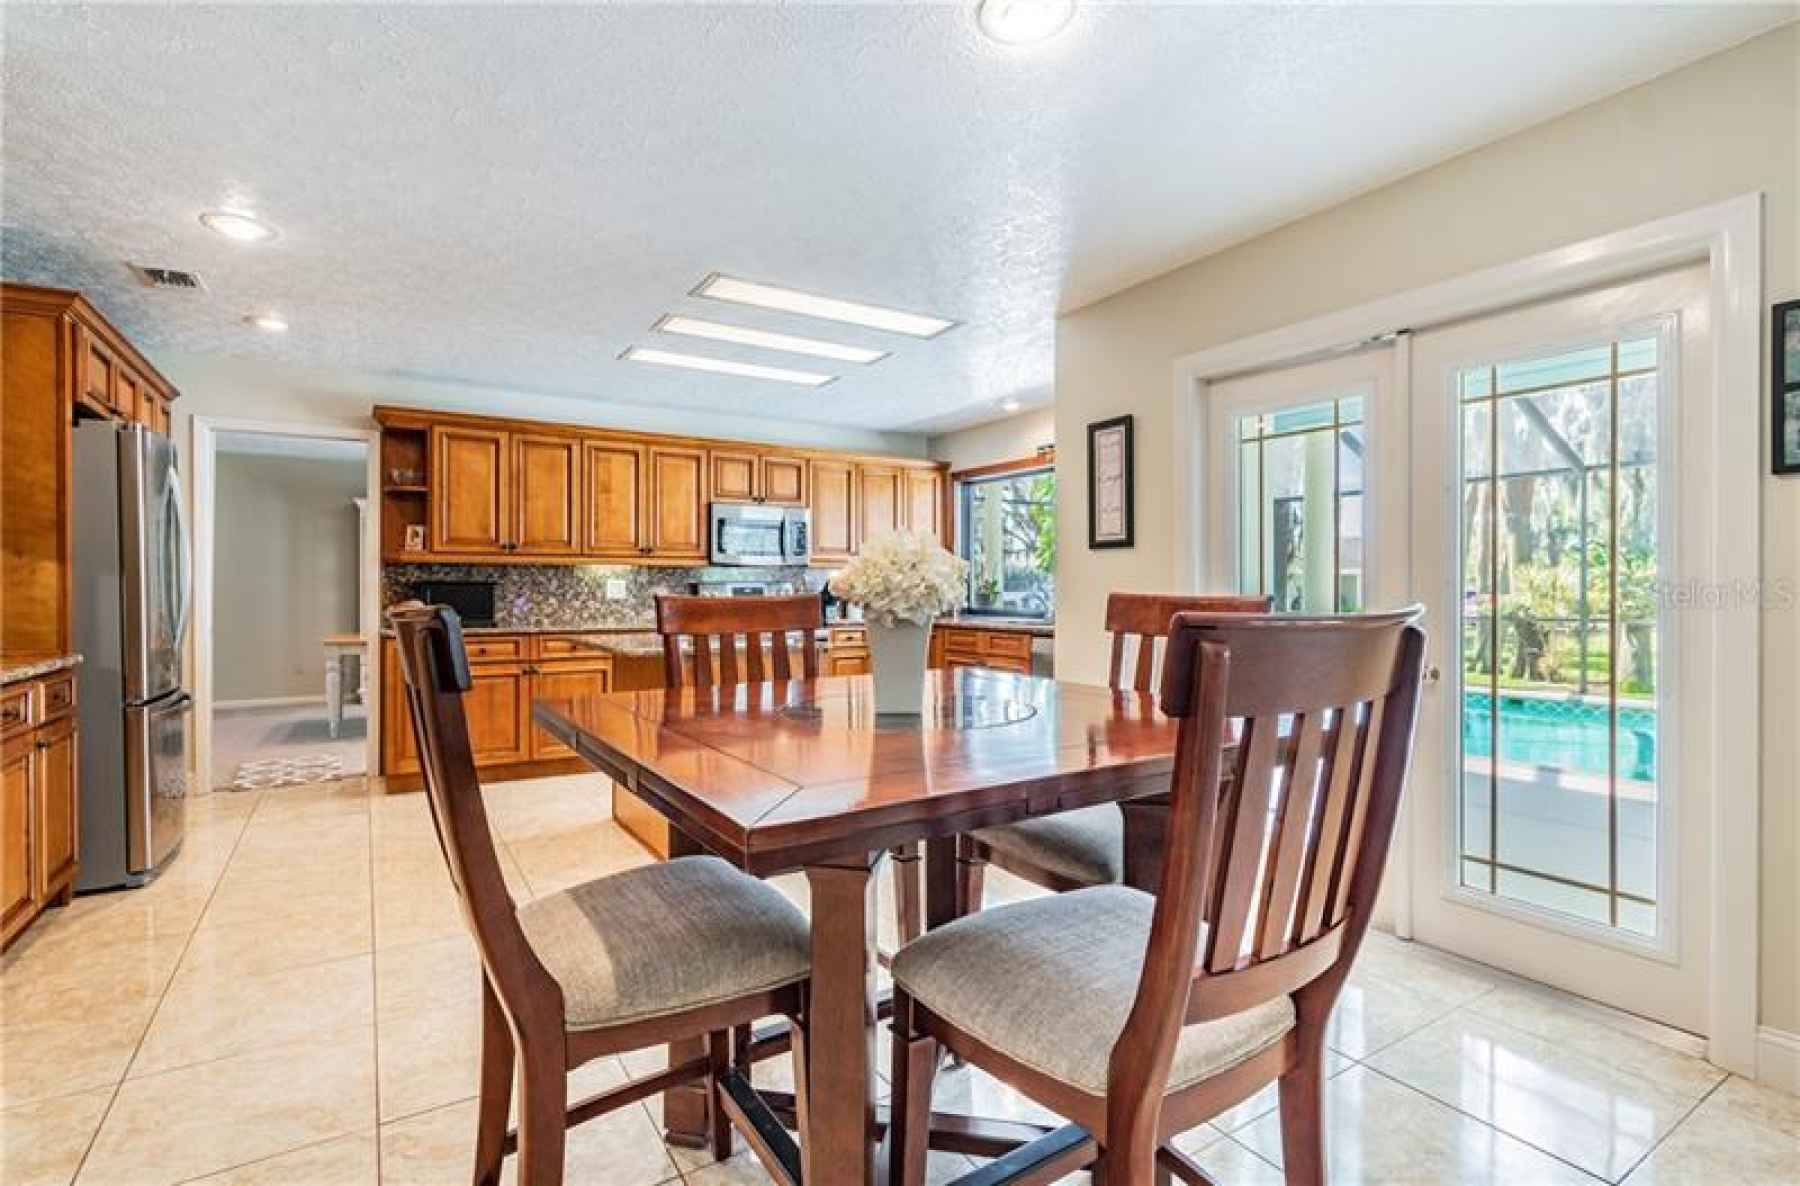 Eat-in kitchen dining space with French doors to patio.